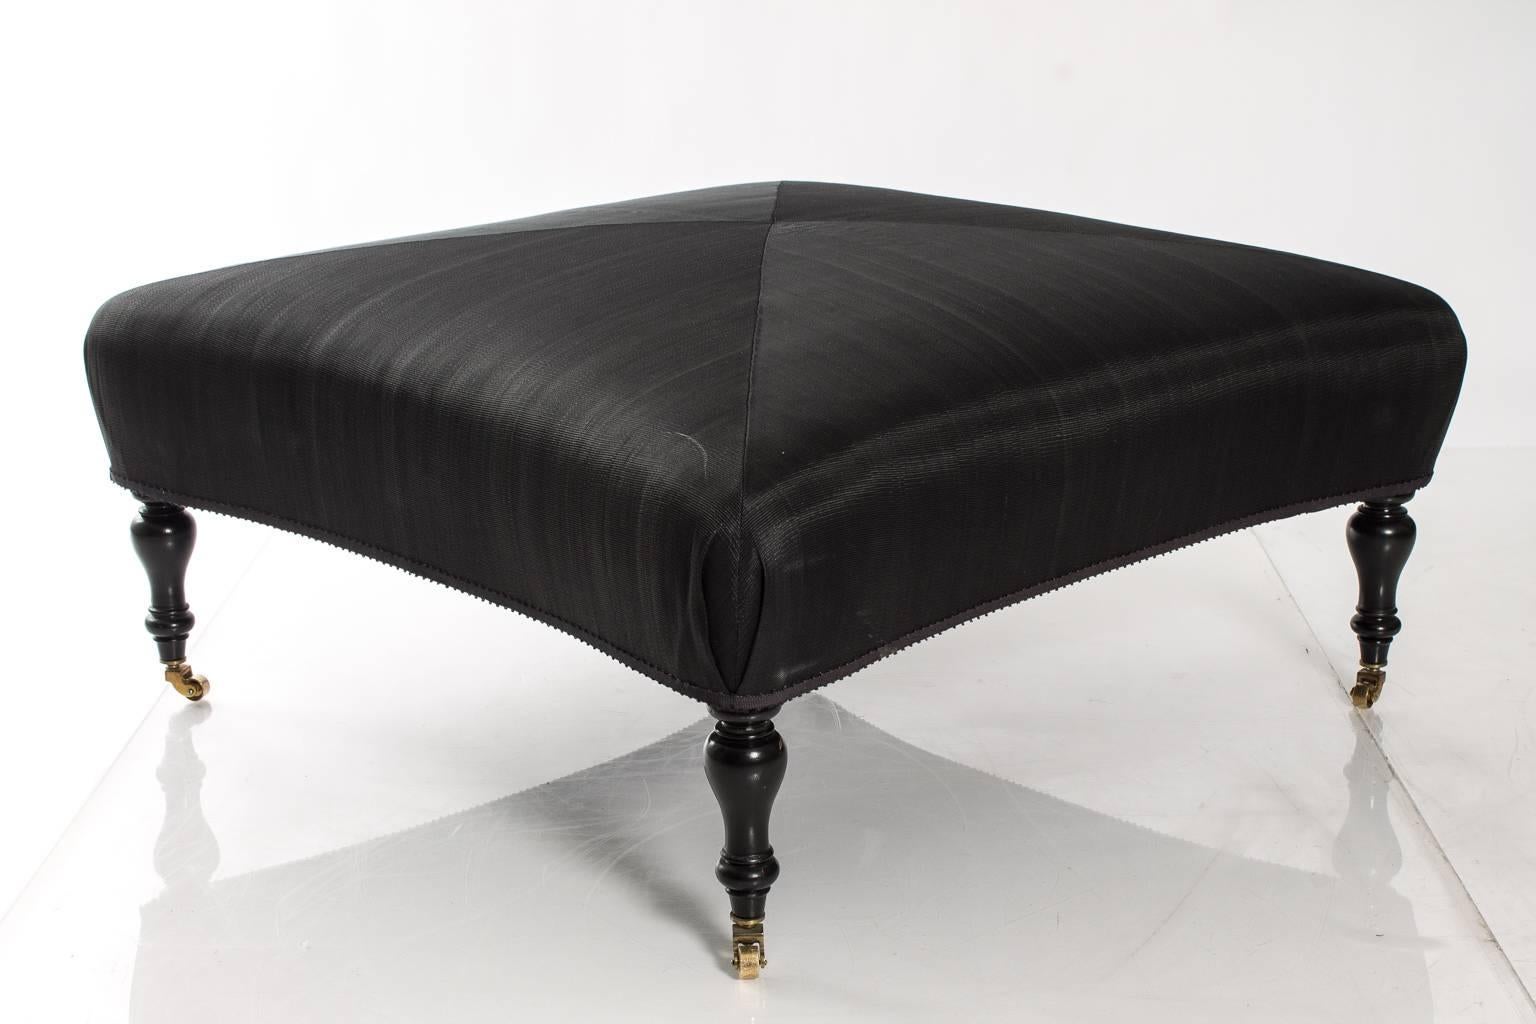 Square ottoman with concave ends. Raised on ebonized turn legs and castors.